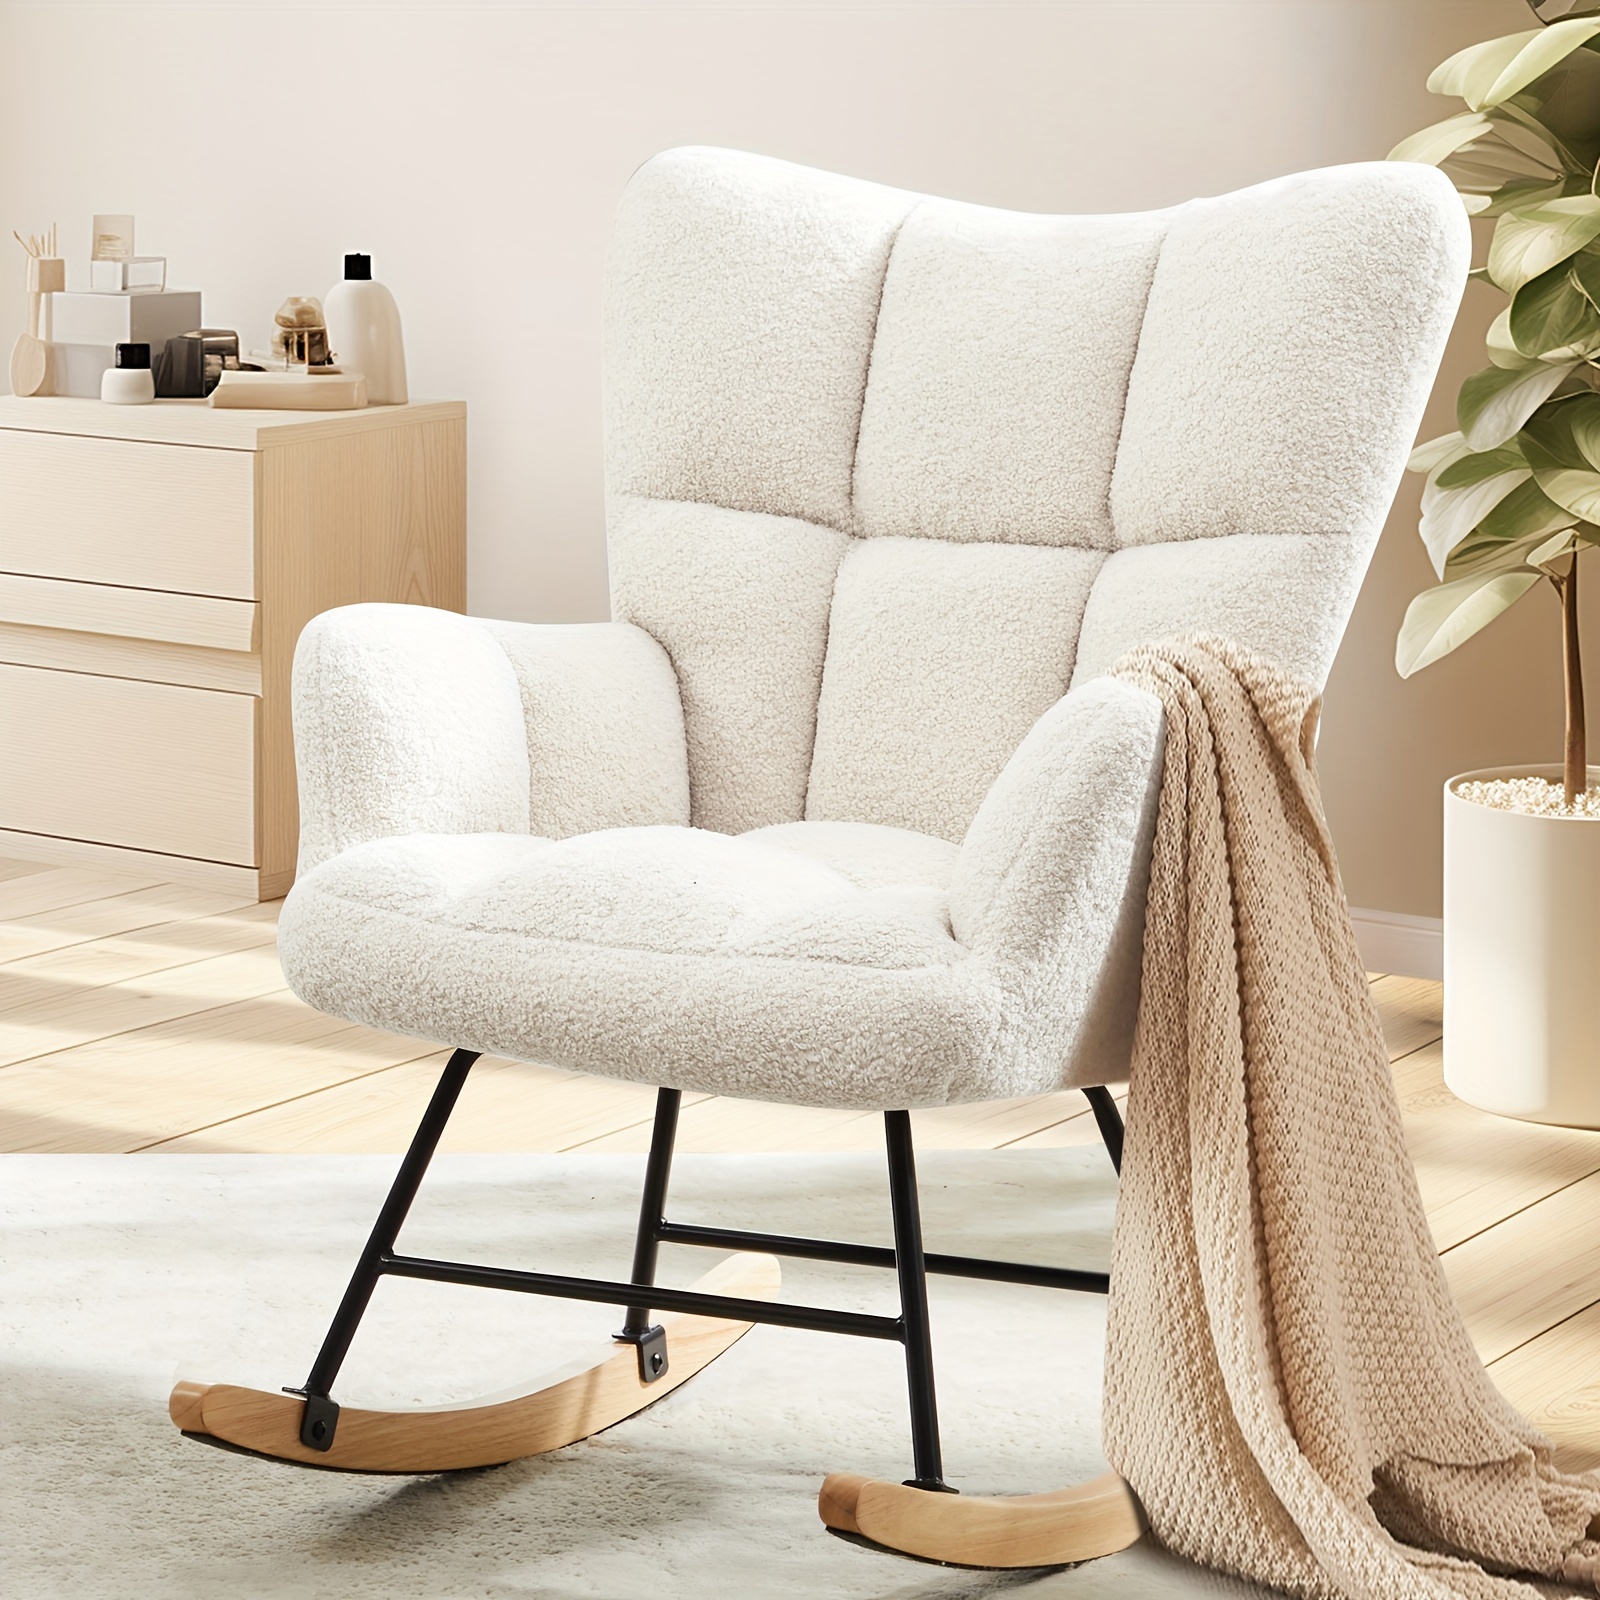 

1pc Plush Teddy Fabric Rocking Chair With High Backrest, Modern Metal & Wood Glider Rocker Chair, Comfortable Upholstered Recliner Reading Chair For Living Room, Bedroom - Beige